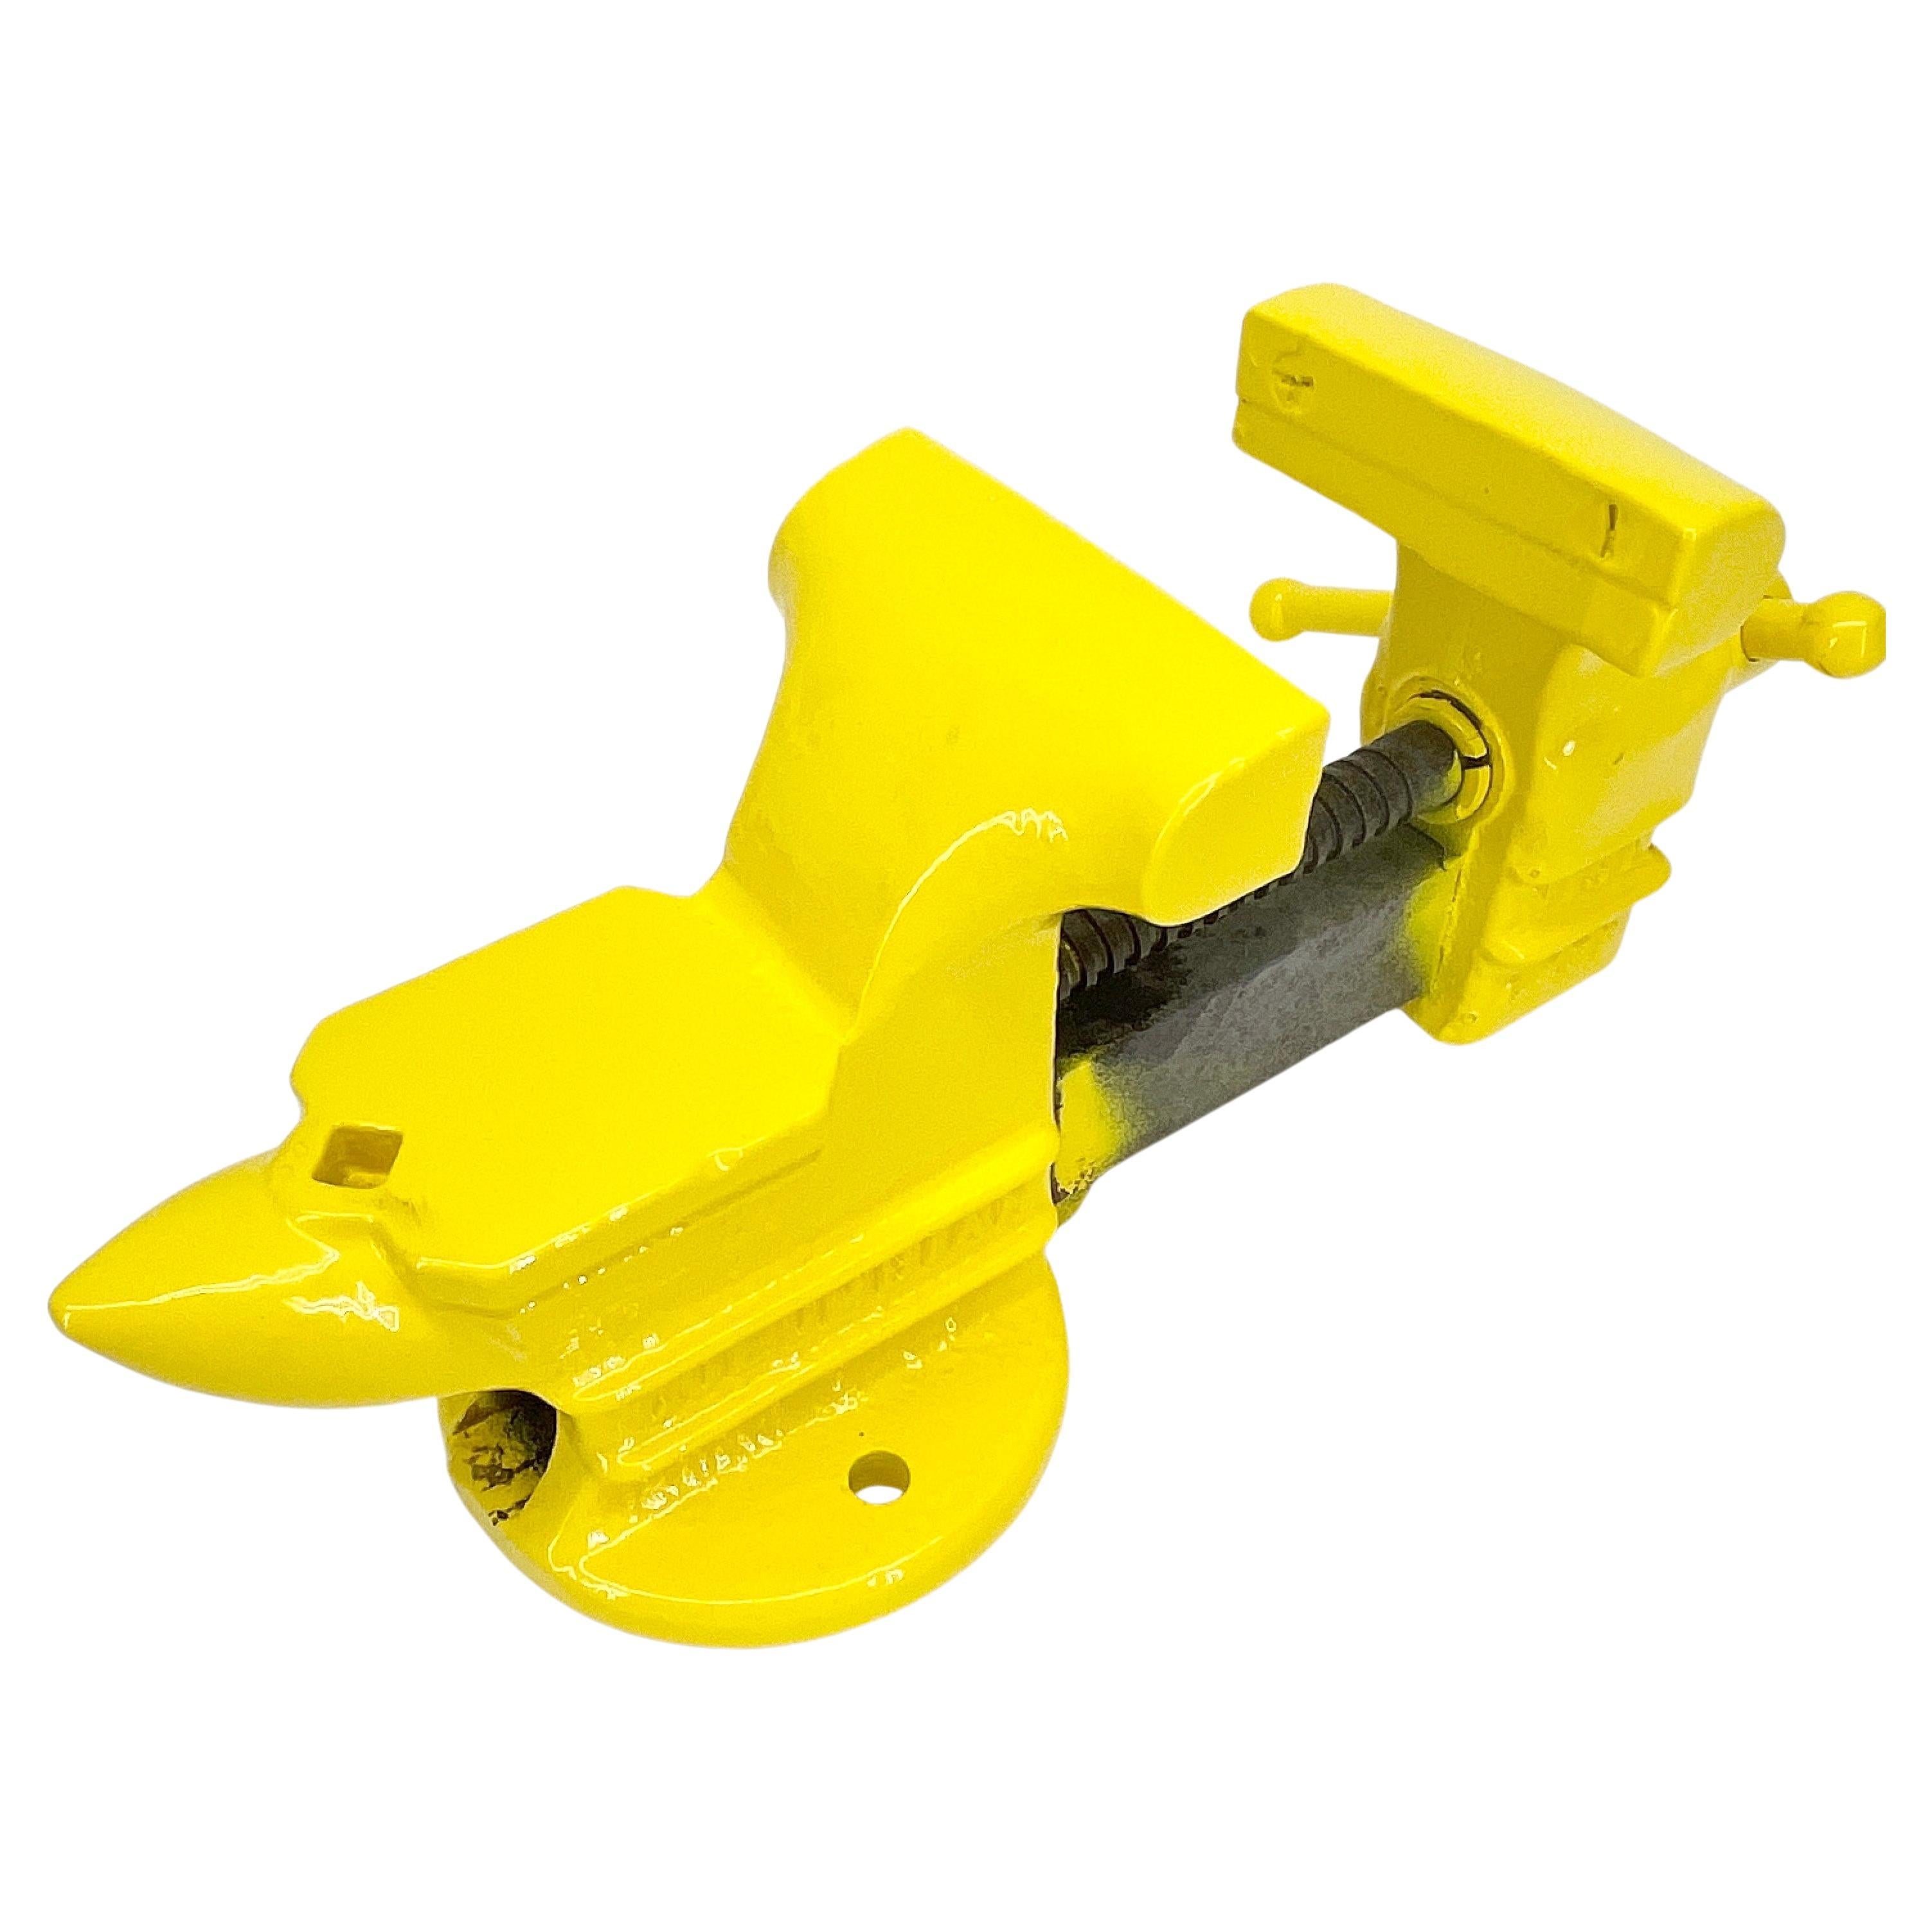 Vintage vice powder-coated in bright yellow. 
Just look at this antique vice which has been painted in 